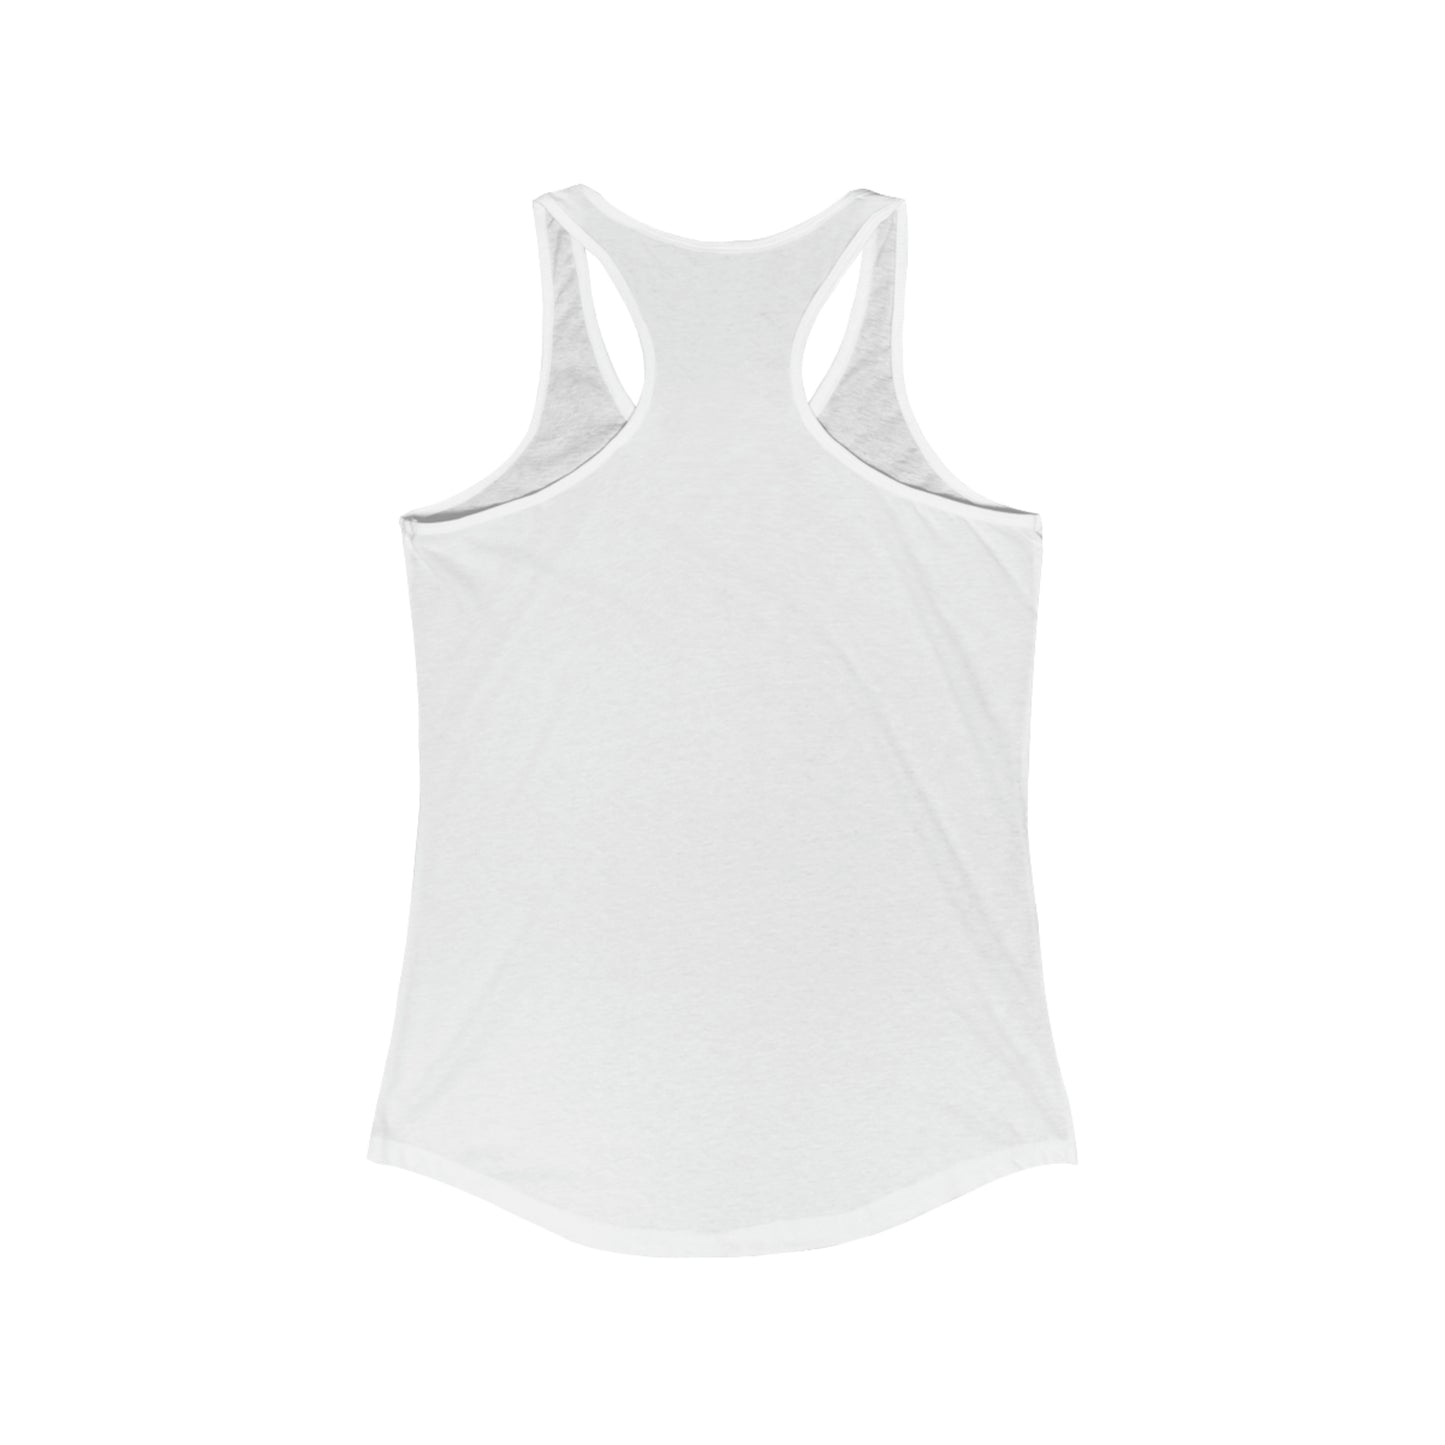 The Coffee Couture Ideal Racerback Tank